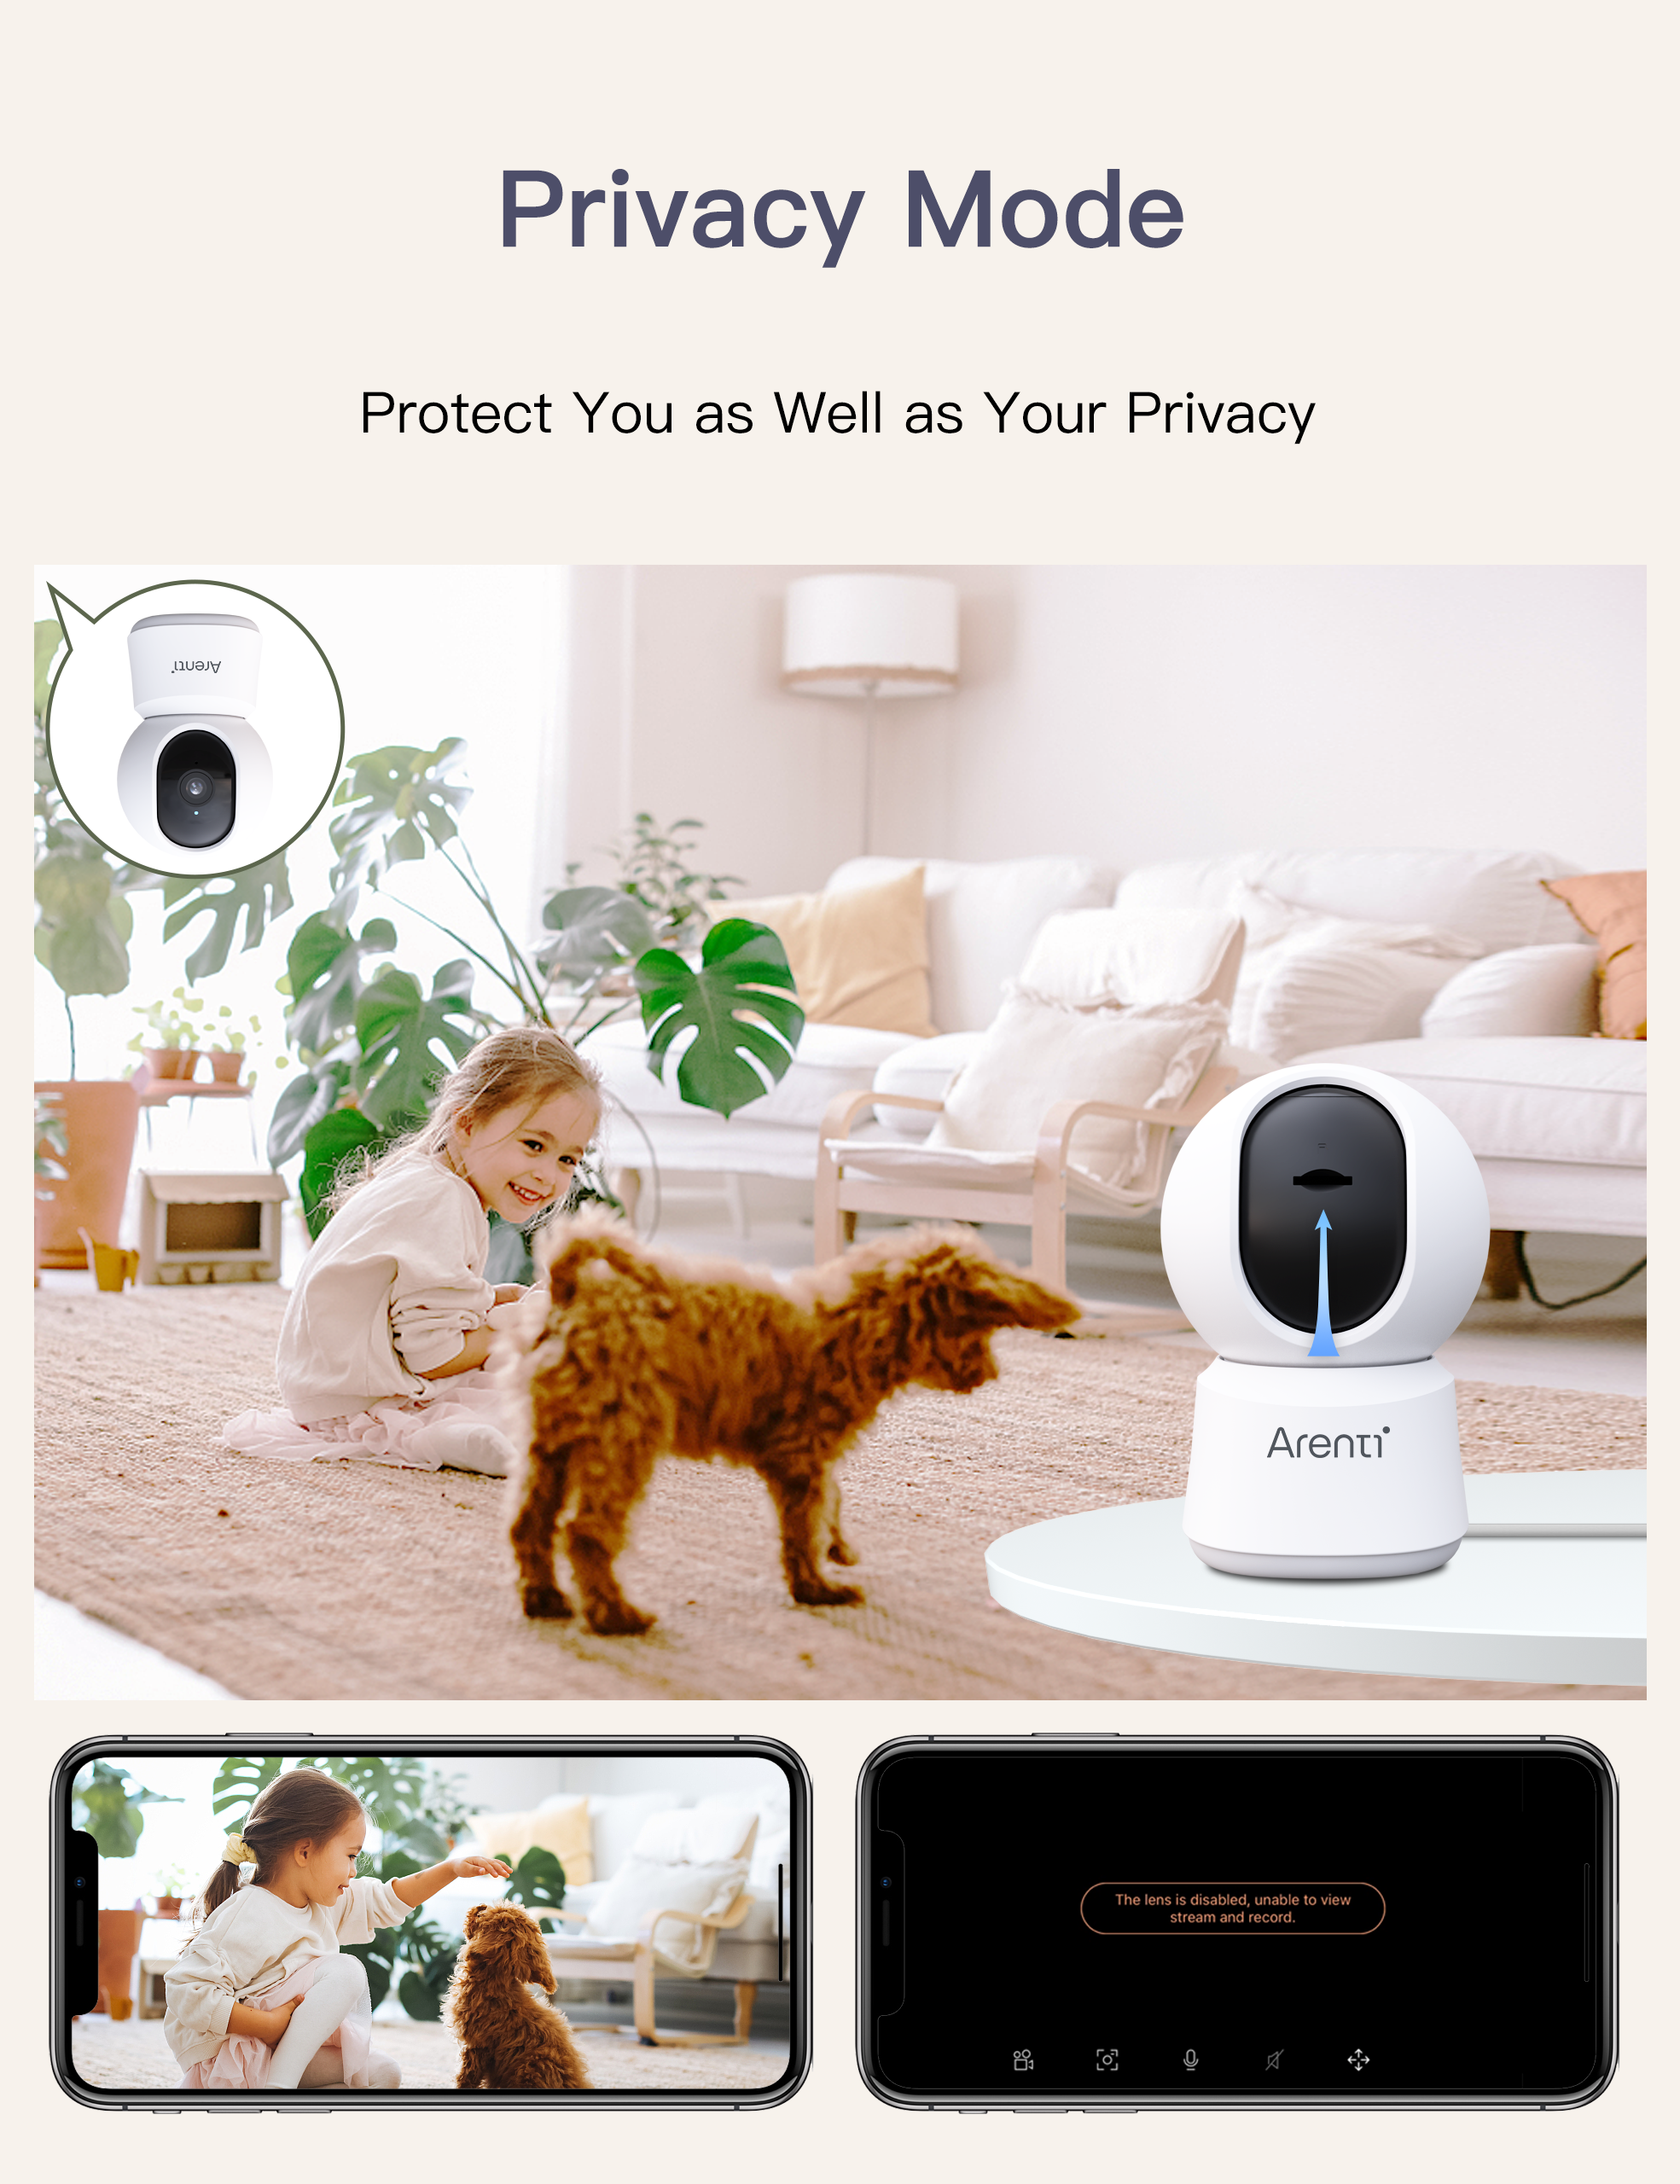 Can You Use a Security Camera to Watch Your Pets?